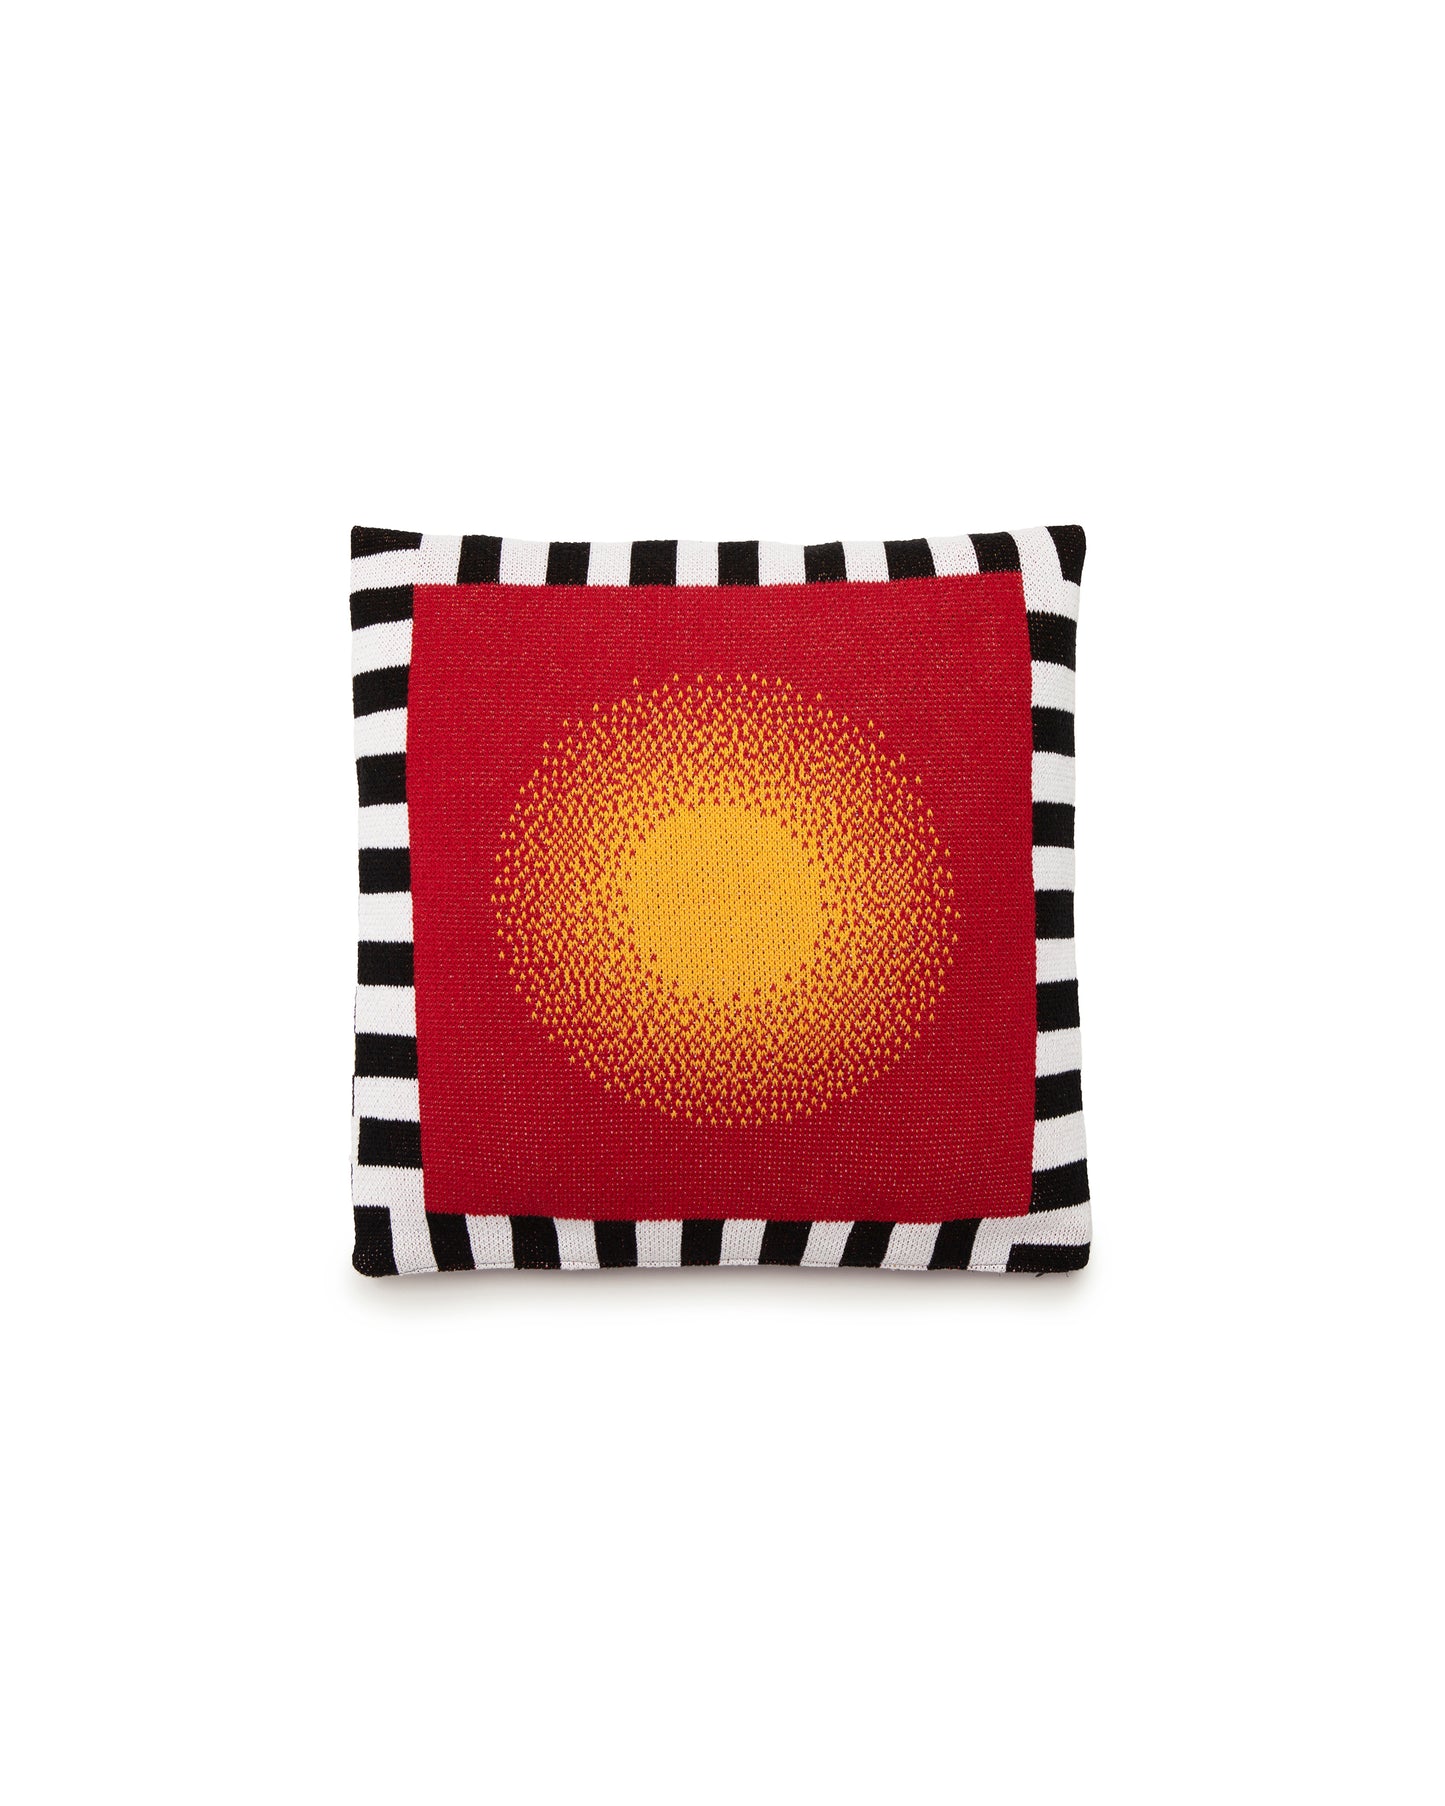 Image of knit burst pillow cover showing the side that has a yellow circle gradually fading into a red background with a black and white stripe border along the entirety of the cover. Size is 18" by 18"